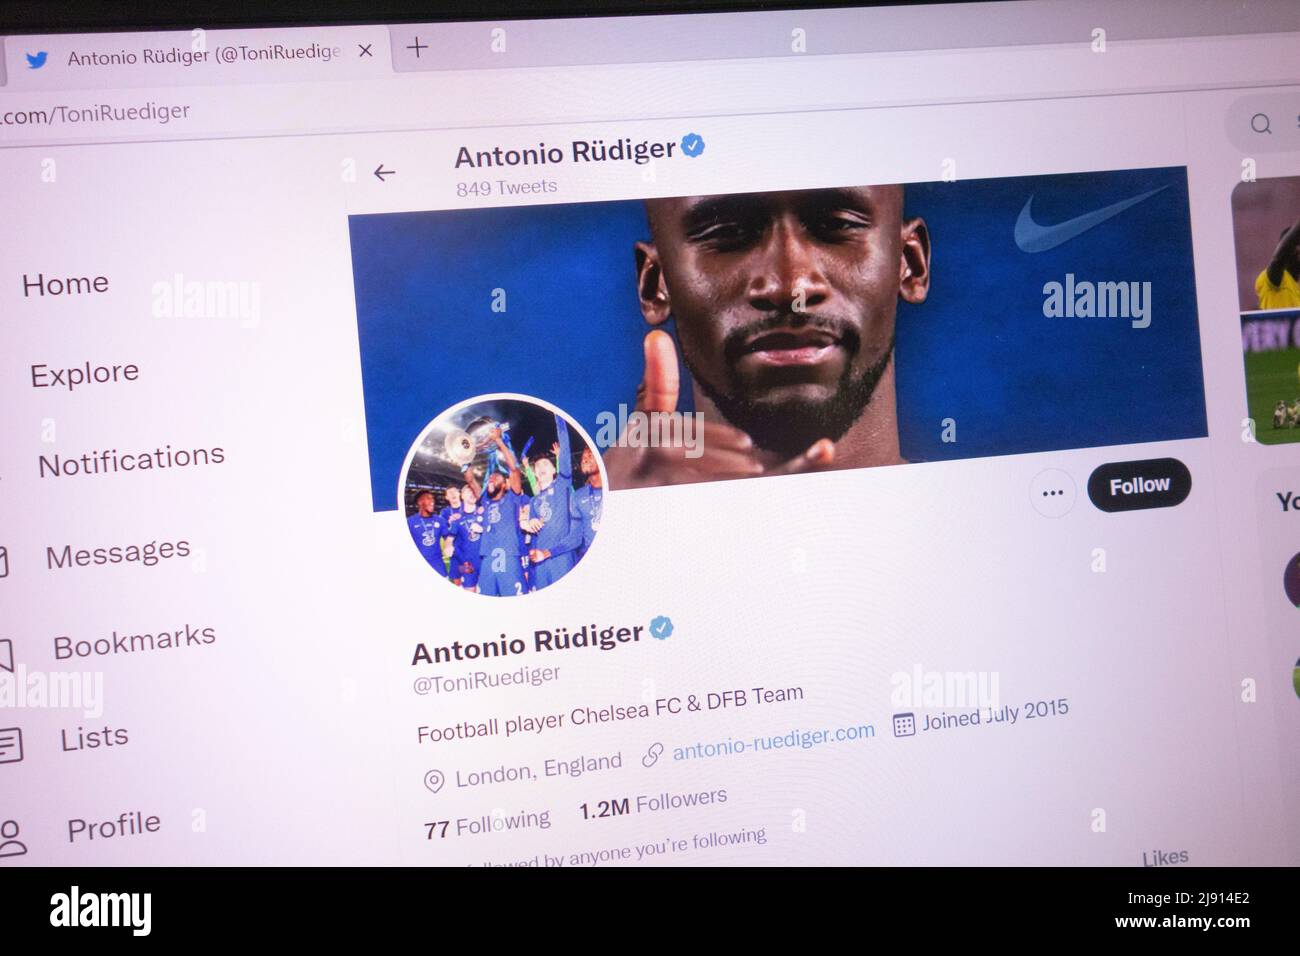 KONSKIE, POLAND - May 18, 2022: Antonio Rudiger official Twitter account displayed on laptop screen Stock Photo